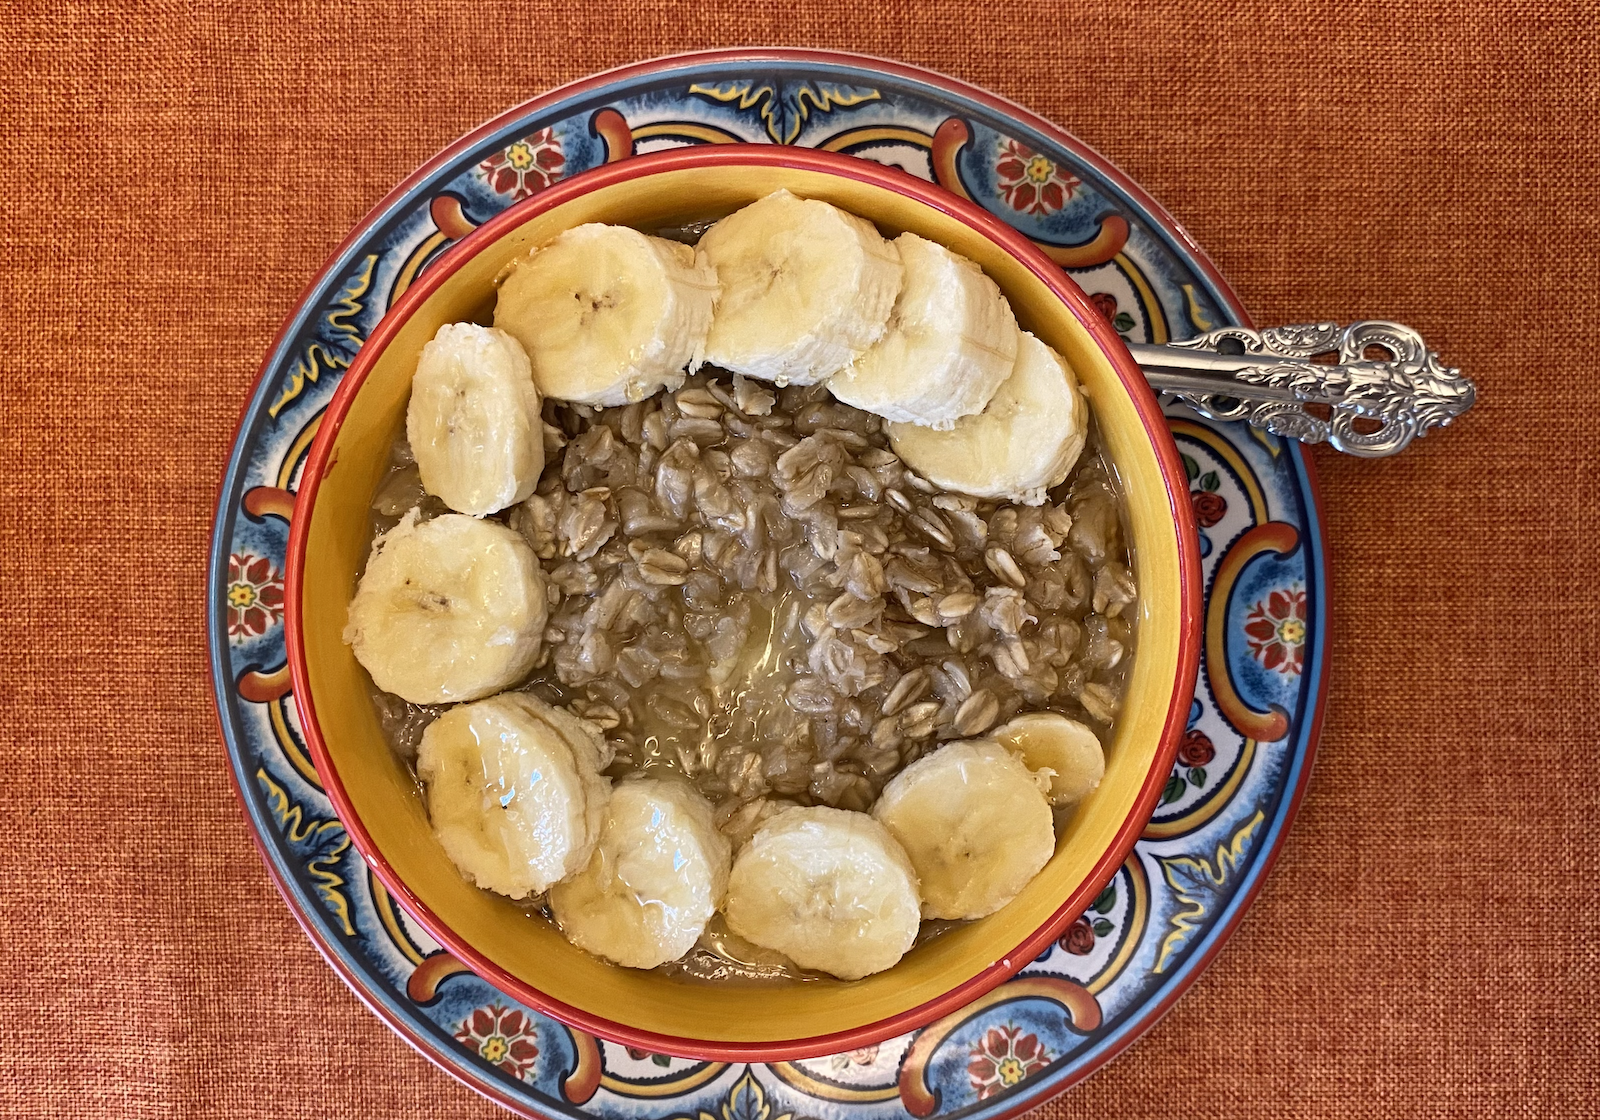 Cinnamon oatmeal in a bowl topped with bananas